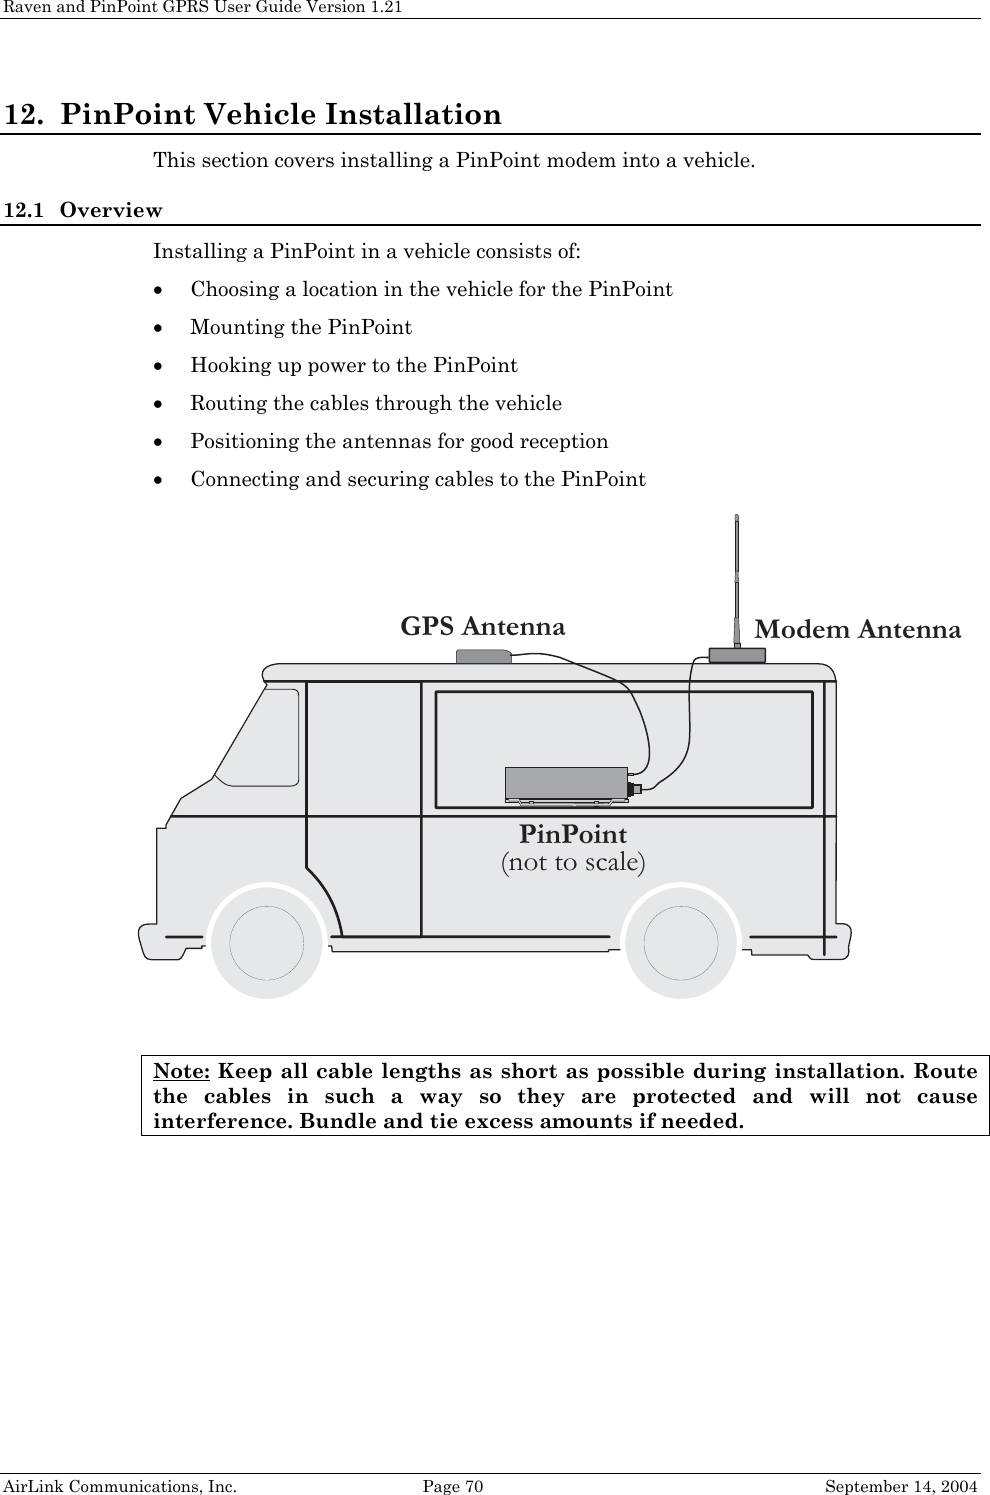 Raven and PinPoint GPRS User Guide Version 1.21 12. PinPoint Vehicle Installation This section covers installing a PinPoint modem into a vehicle. 12.1 Overview Installing a PinPoint in a vehicle consists of: • Choosing a location in the vehicle for the PinPoint • Mounting the PinPoint • Hooking up power to the PinPoint • Routing the cables through the vehicle • Positioning the antennas for good reception • Connecting and securing cables to the PinPoint  Modem AntennaGPS AntennaPinPoint(not to scale)Note: Keep all cable lengths as short as possible during installation. Route the cables in such a way so they are protected and will not cause interference. Bundle and tie excess amounts if needed. AirLink Communications, Inc.  Page 70  September 14, 2004 